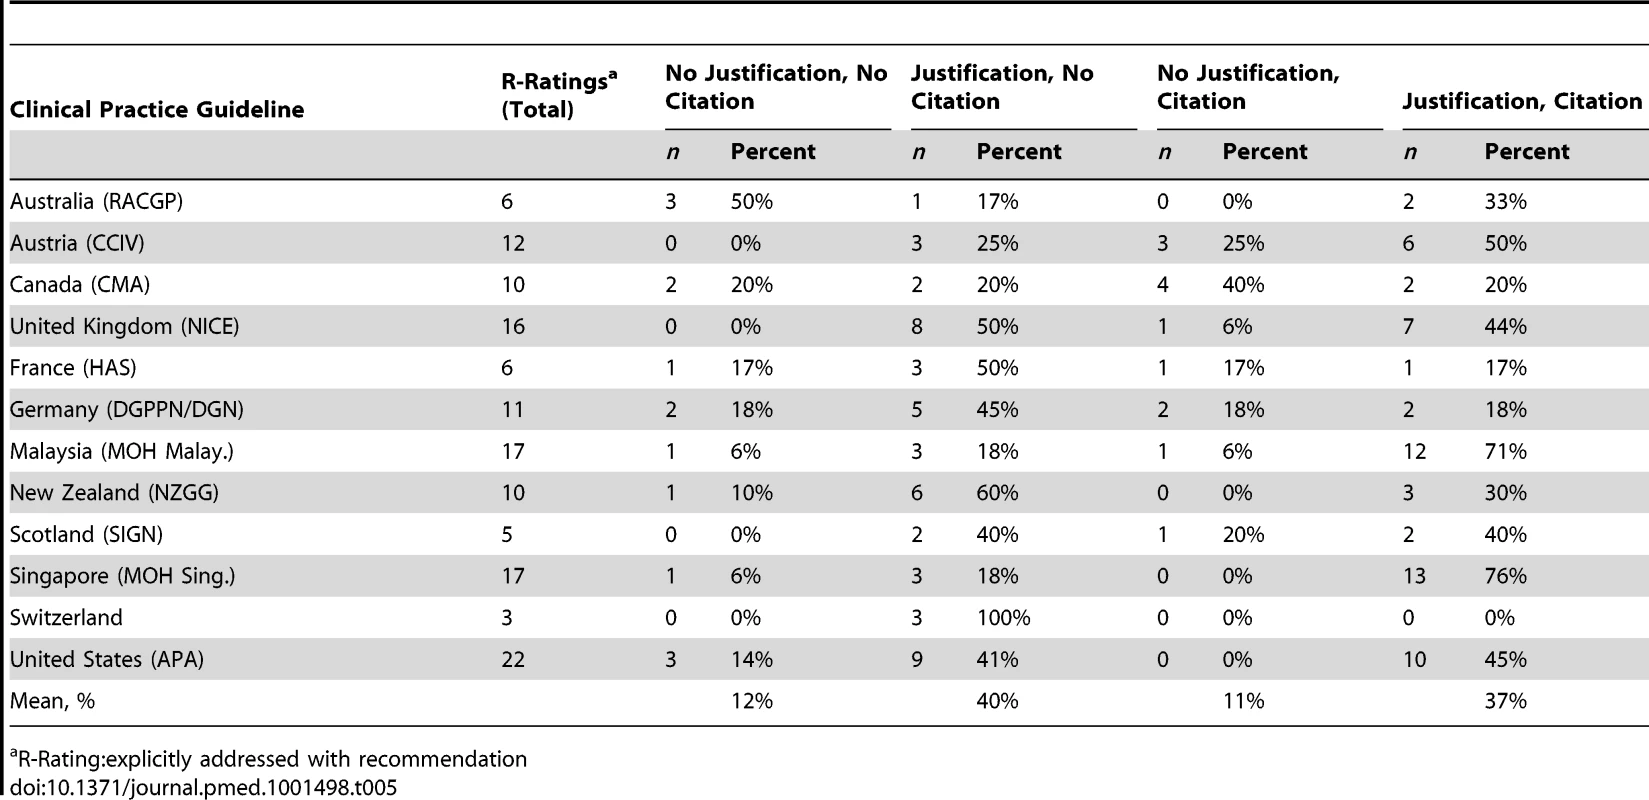 Rating results for how often a CPG gave a recommendation (R-Rating) along with justification and/or citations with respect to the 31 DSEIs presented.